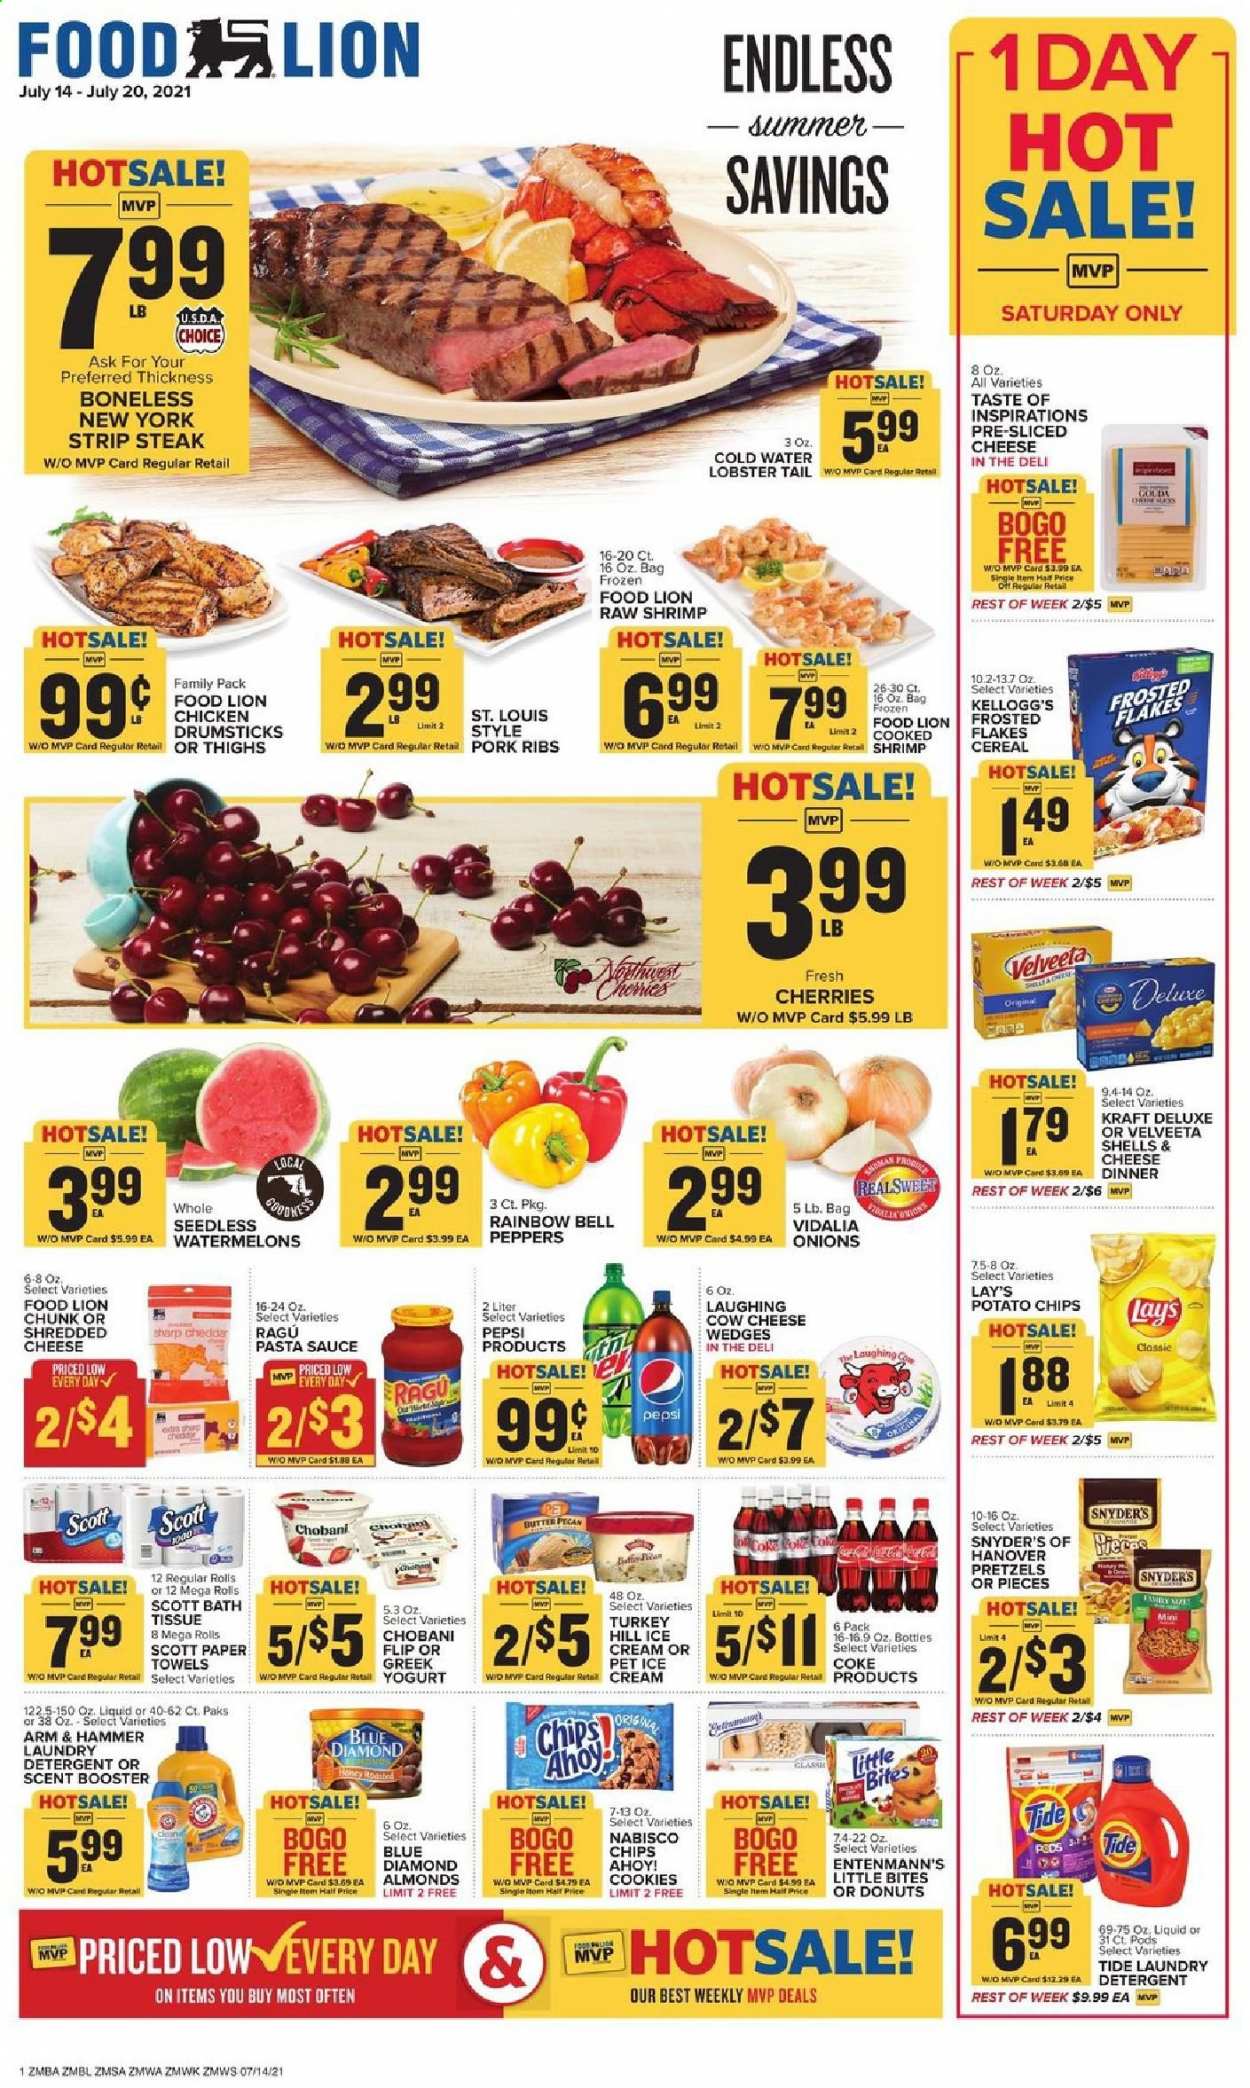 thumbnail - Food Lion Flyer - 07/14/2021 - 07/20/2021 - Sales products - pretzels, donut, Entenmann's, bell peppers, onion, peppers, cherries, lobster, lobster tail, shrimps, pasta sauce, sauce, Kraft®, ragú pasta, shredded cheese, sliced cheese, The Laughing Cow, Chobani, butter, ice cream, cookies, Kellogg's, Chips Ahoy!, Little Bites, potato chips, Lay’s, ARM & HAMMER, cereals, Frosted Flakes, ragu, honey, almonds, Blue Diamond, Coca-Cola, Pepsi, chicken drumsticks, beef meat, steak, striploin steak, pork meat, pork ribs, bath tissue, Scott, kitchen towels, paper towels, detergent, Tide, laundry detergent, Sharp. Page 1.